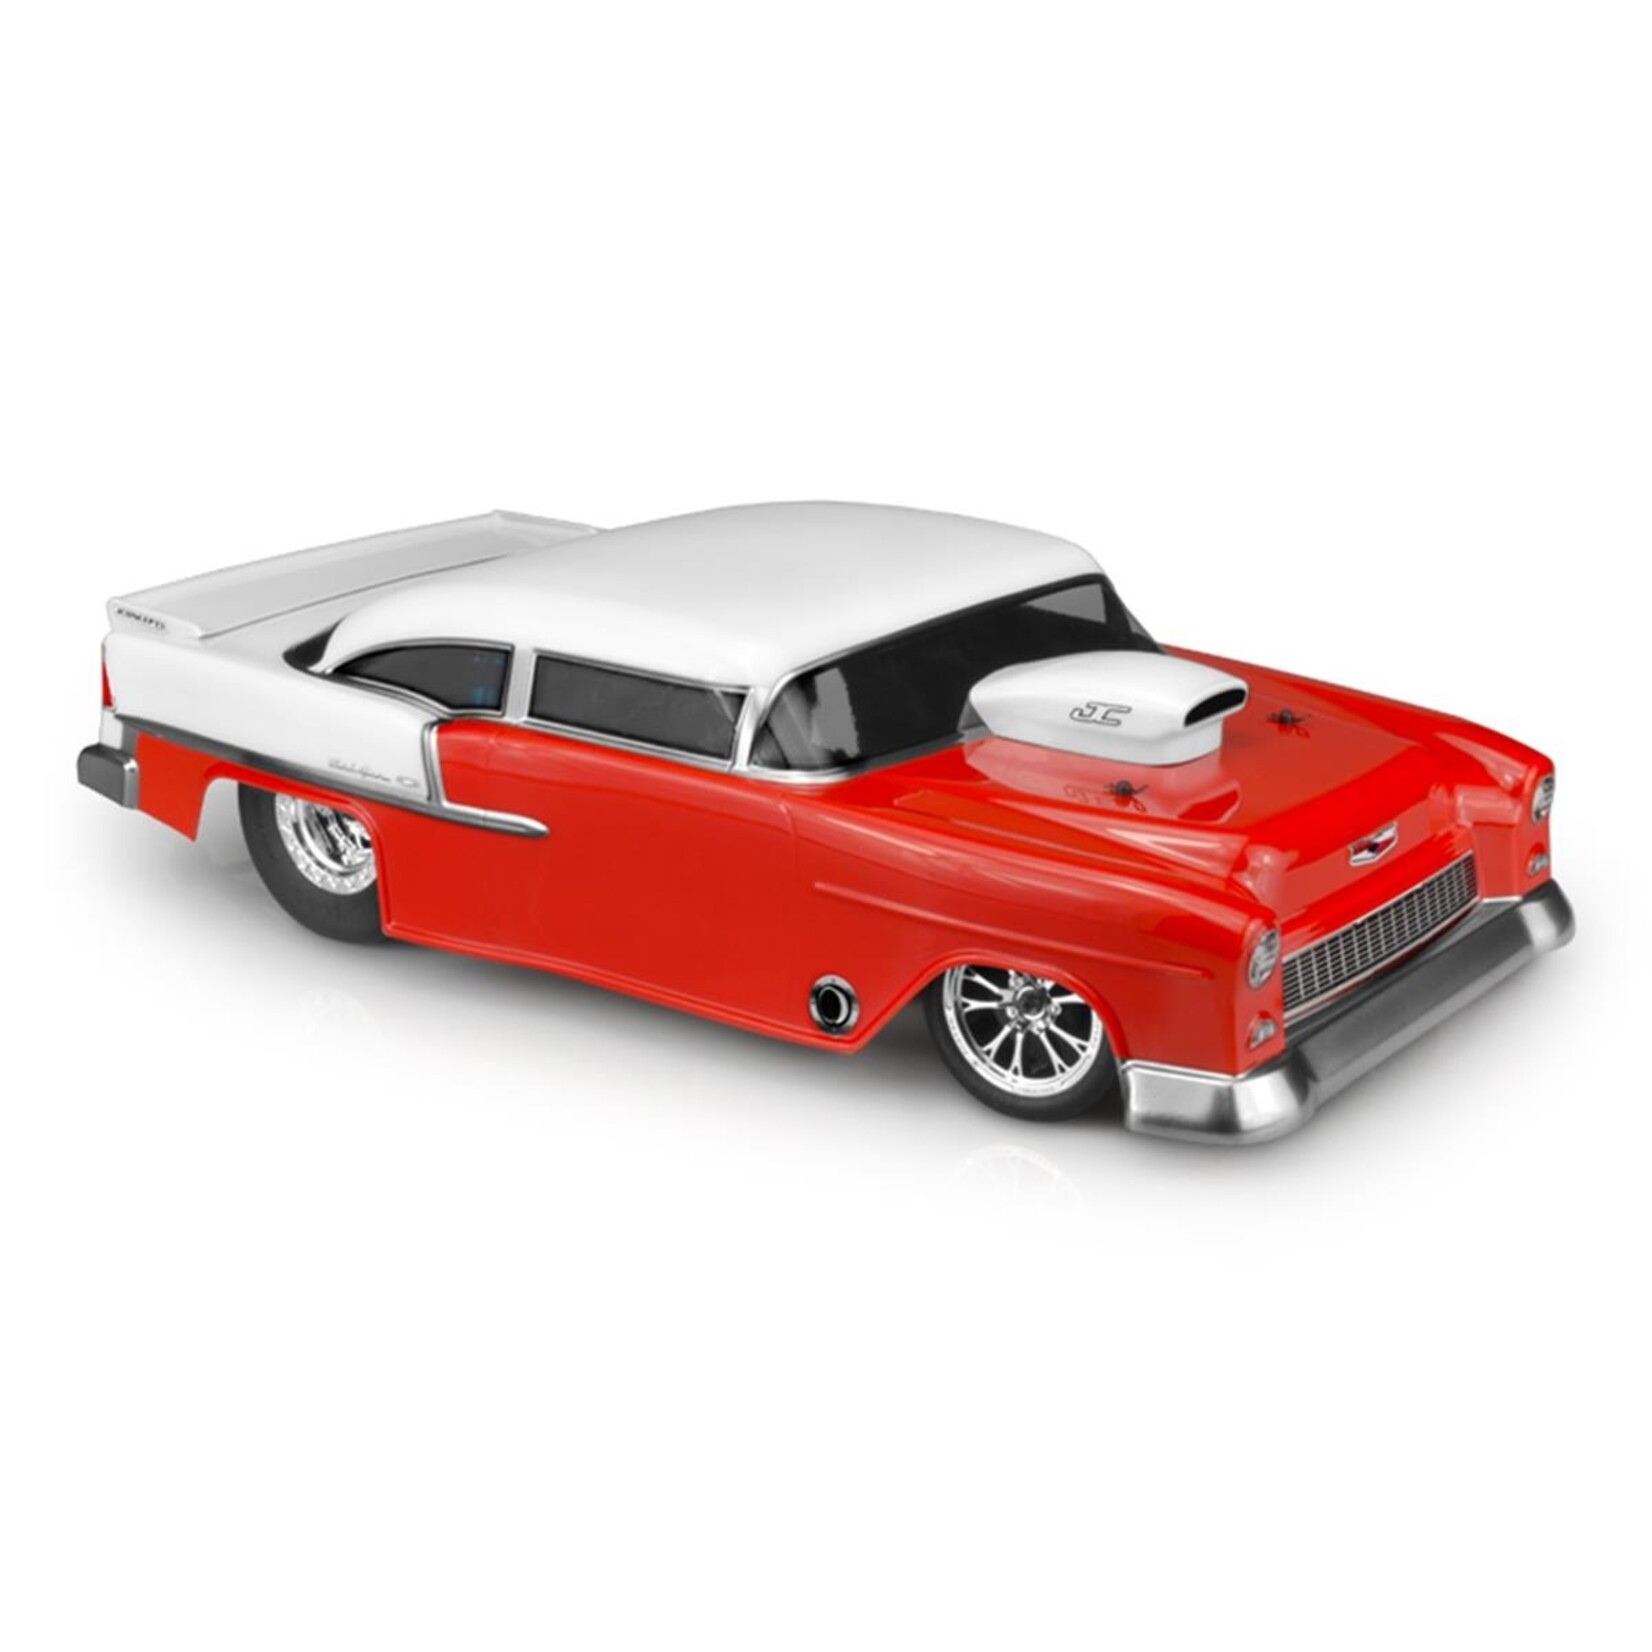 JConcepts JConcepts 1955 Chevy Bel Air Street Eliminator Drag Racing Body (Clear) #0365